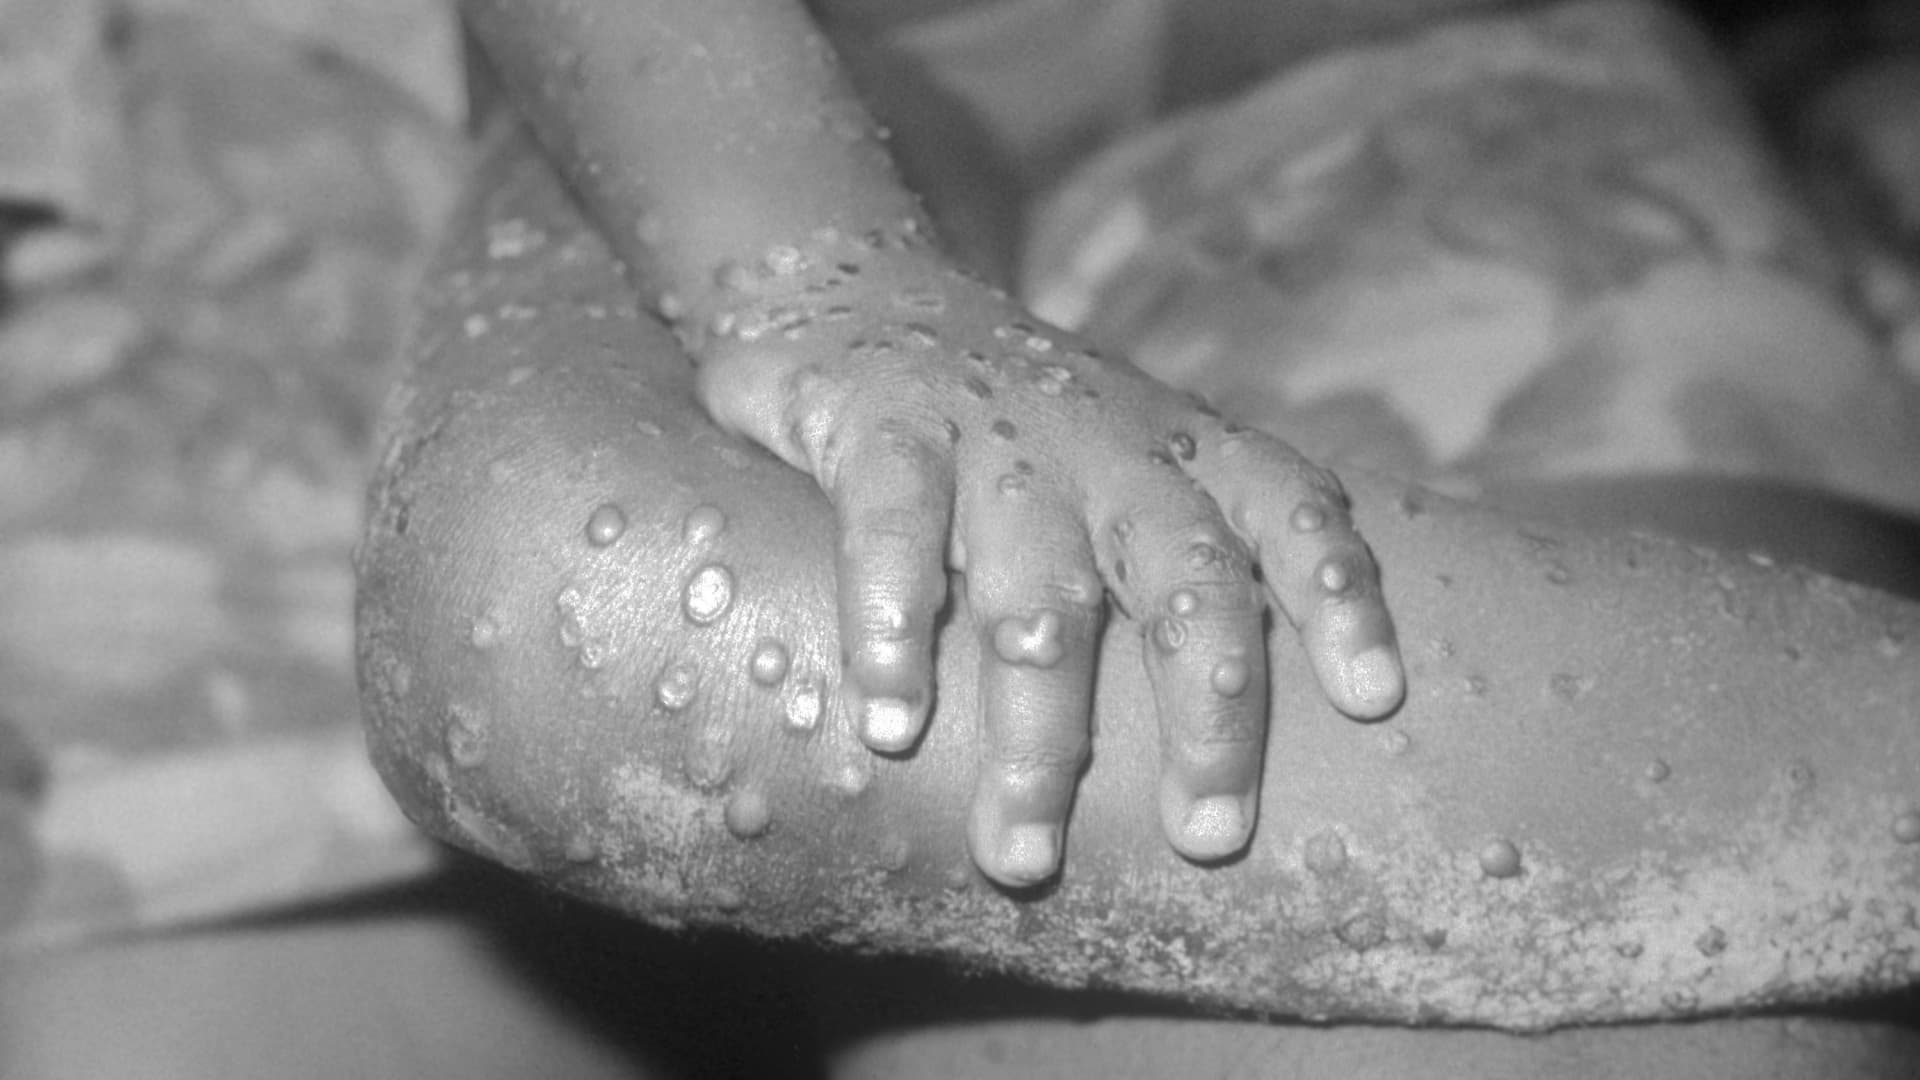 Belgium becomes first country to introduce mandatory monkeypox quarantine as global cases rise - CNBC